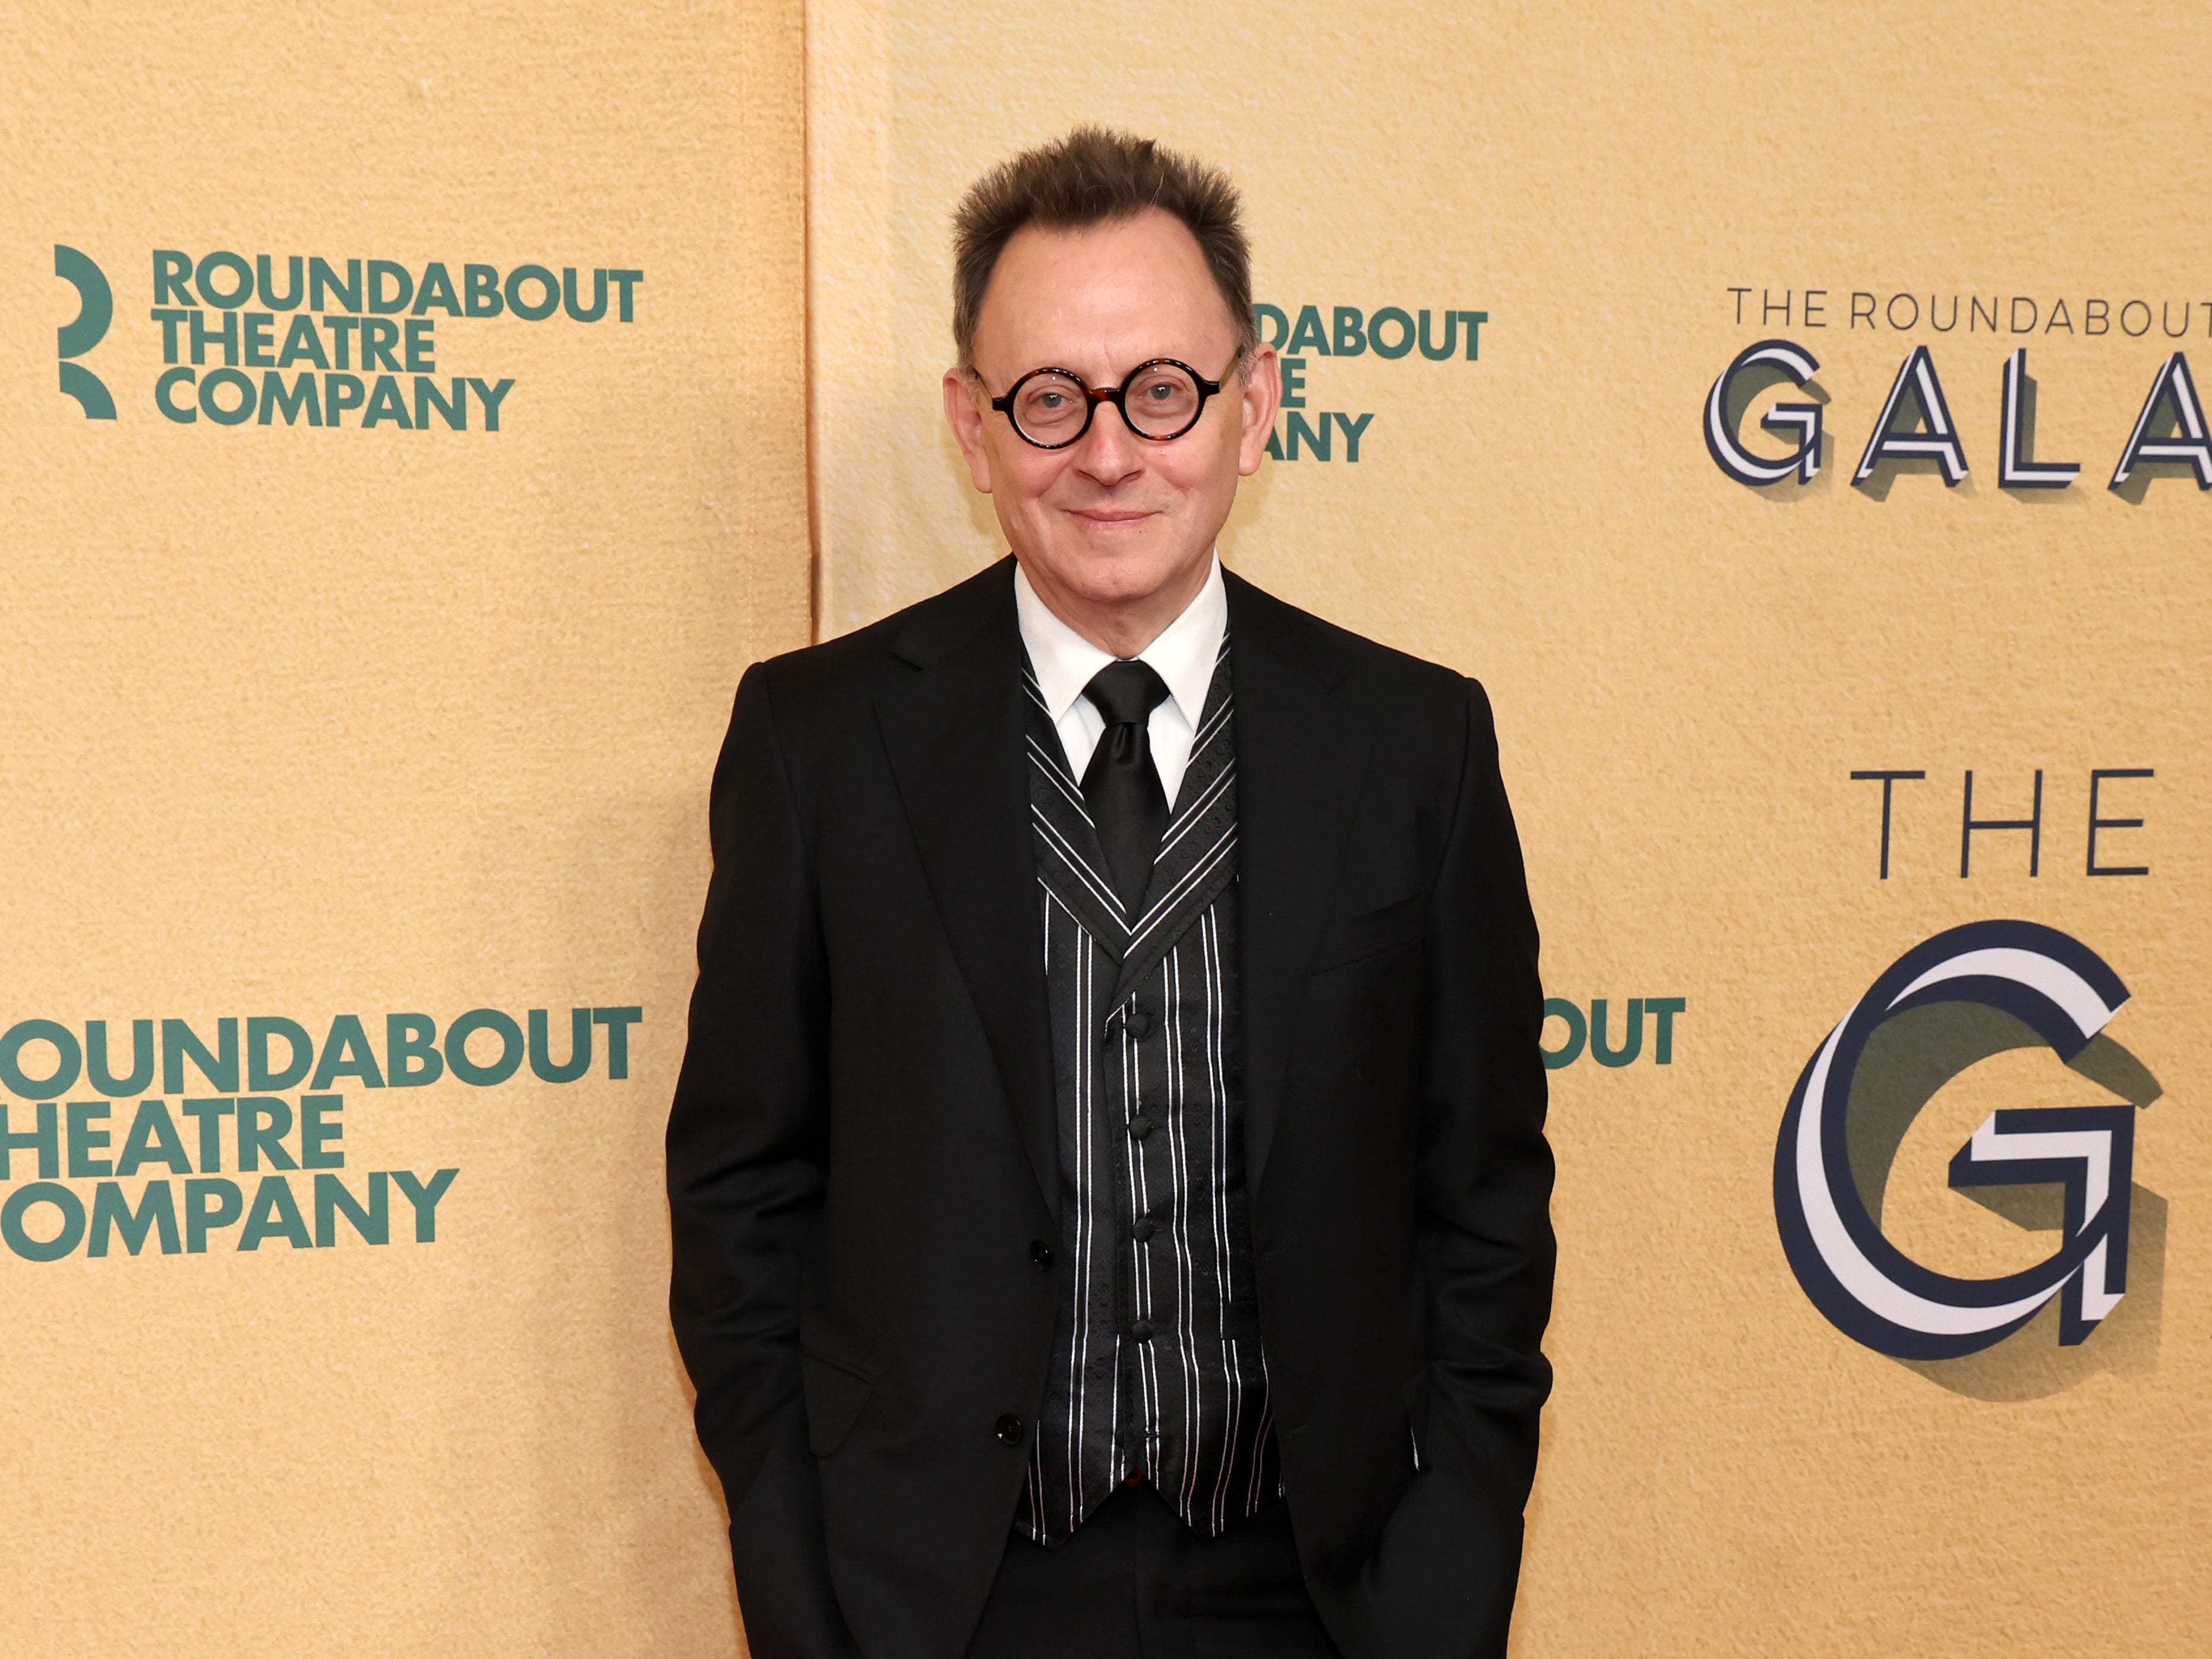 <p>The wasteland is filled with colorful characters, some more mysterious than others. One of those intriguing individuals is Wilzig, played by Michael Emerson. Little is known about the character, but the Vanity Fair feature describes him as an "enigmatic researcher."</p><p>Wilzig may be a Vault-Tec employee or a member of the sinister Enclave, which experiments with radiation in the games. He can briefly be seen in the trailer warning Lucy about the dangers of post-apocalyptic America.</p><p>Emerson is best known for his role as the scheming villain-turned-ally, Benjamin Linus, in "<a href="https://www.businessinsider.com/cast-of-lost-where-are-they-now-2018-2018-10">Lost</a>." He also played genius billionaire scientist Harold Finch in "Person of Interest."</p>